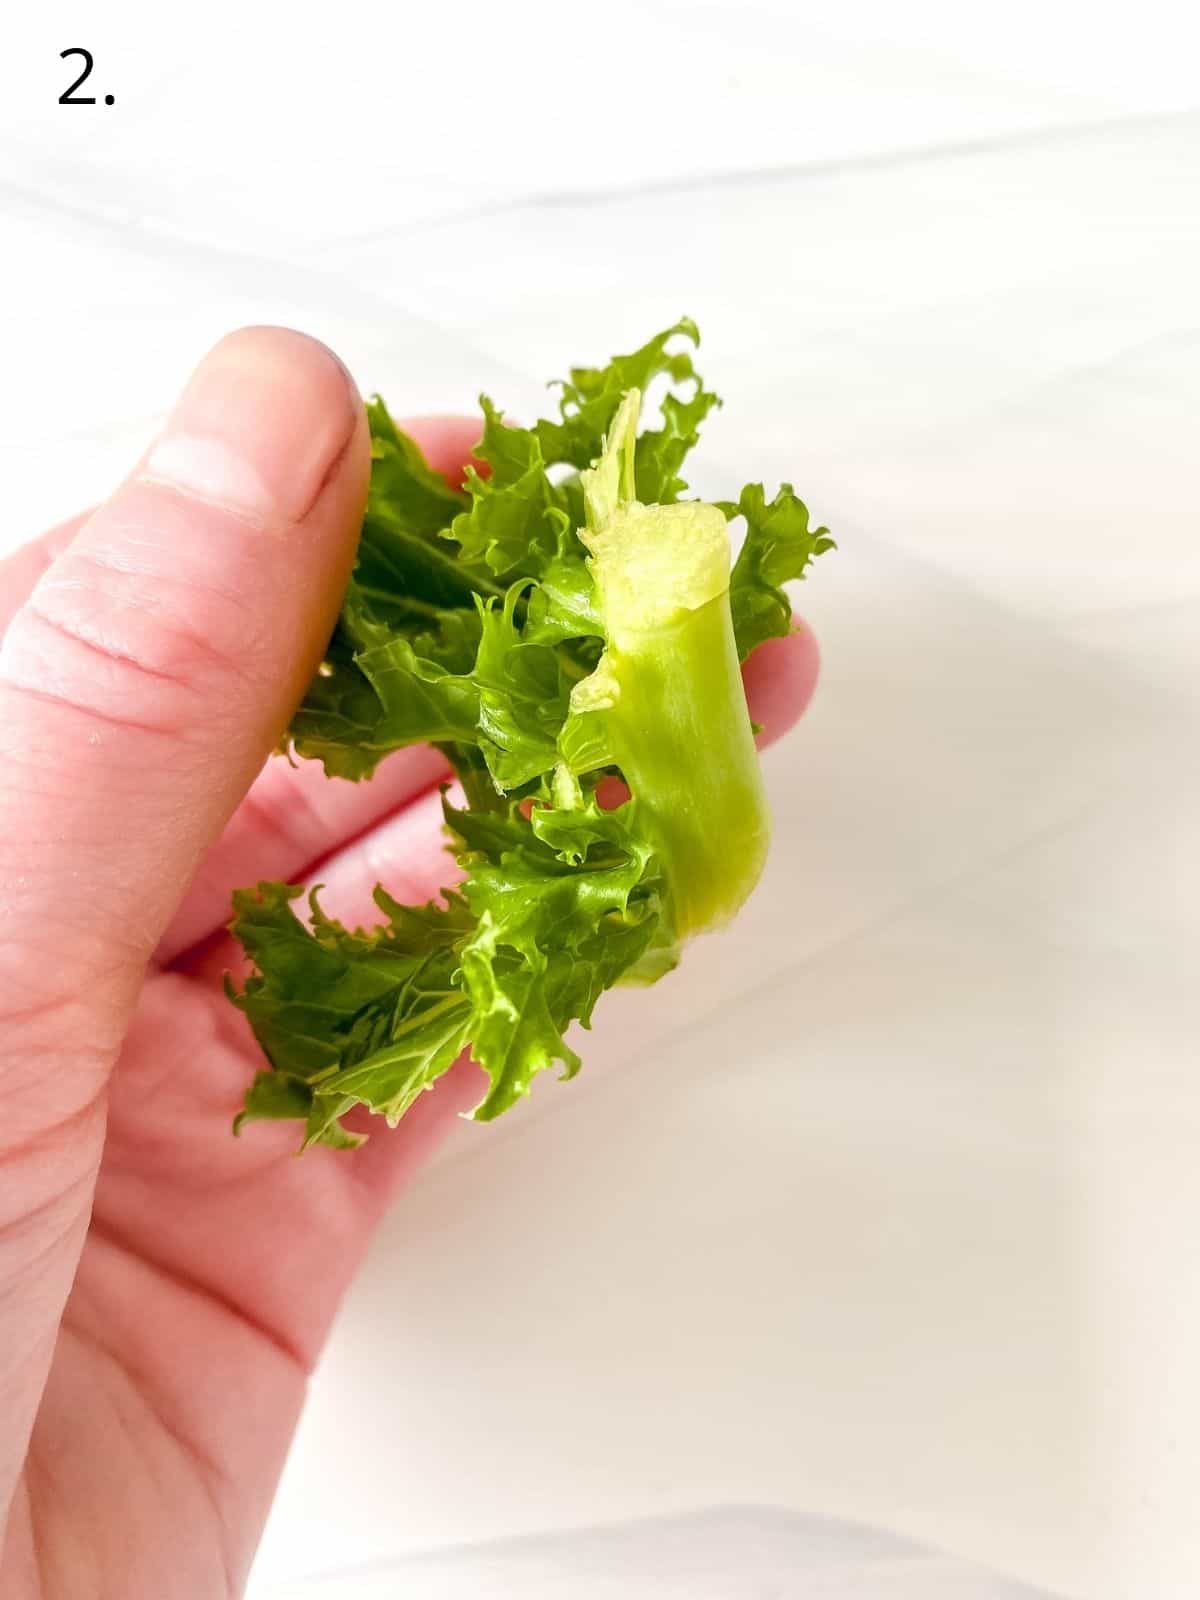 piece of kale being held by a person.